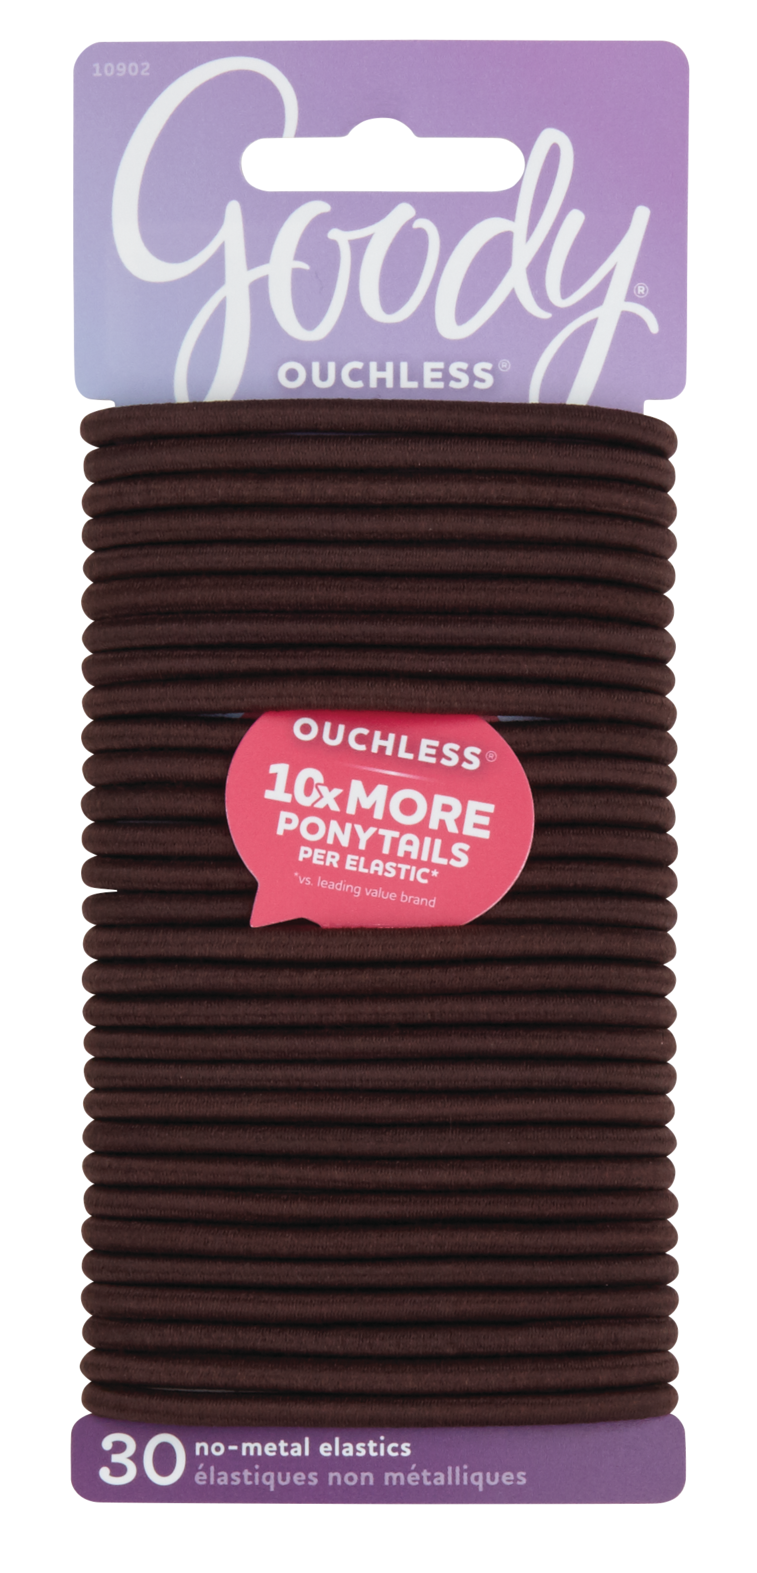 Goody Ouchless Hair Ties Elastics Ponytail Holders 30 CT Brown for Medium Hair